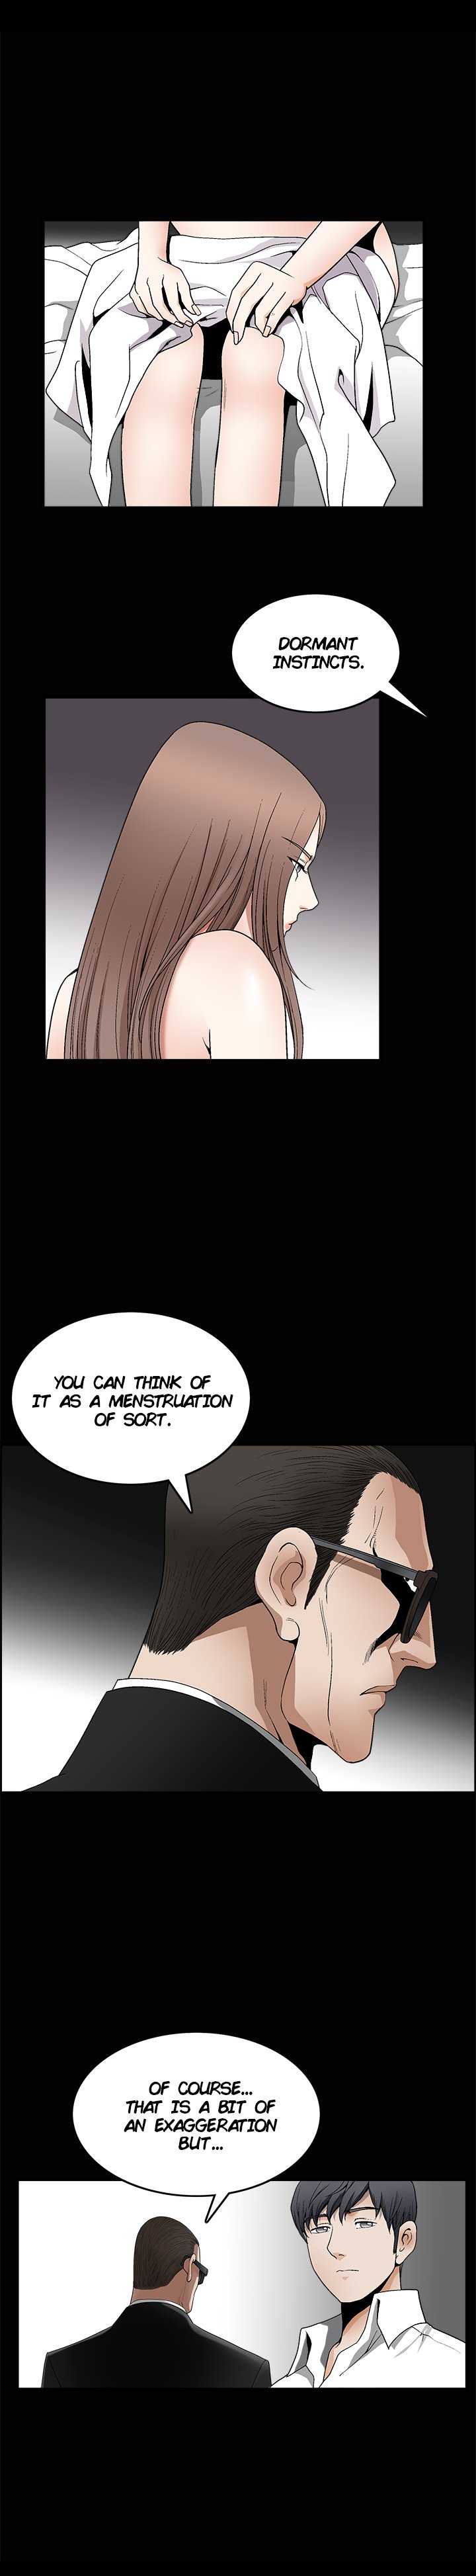 SEDUCTION : Doll Castle - Chapter 7 Page 8